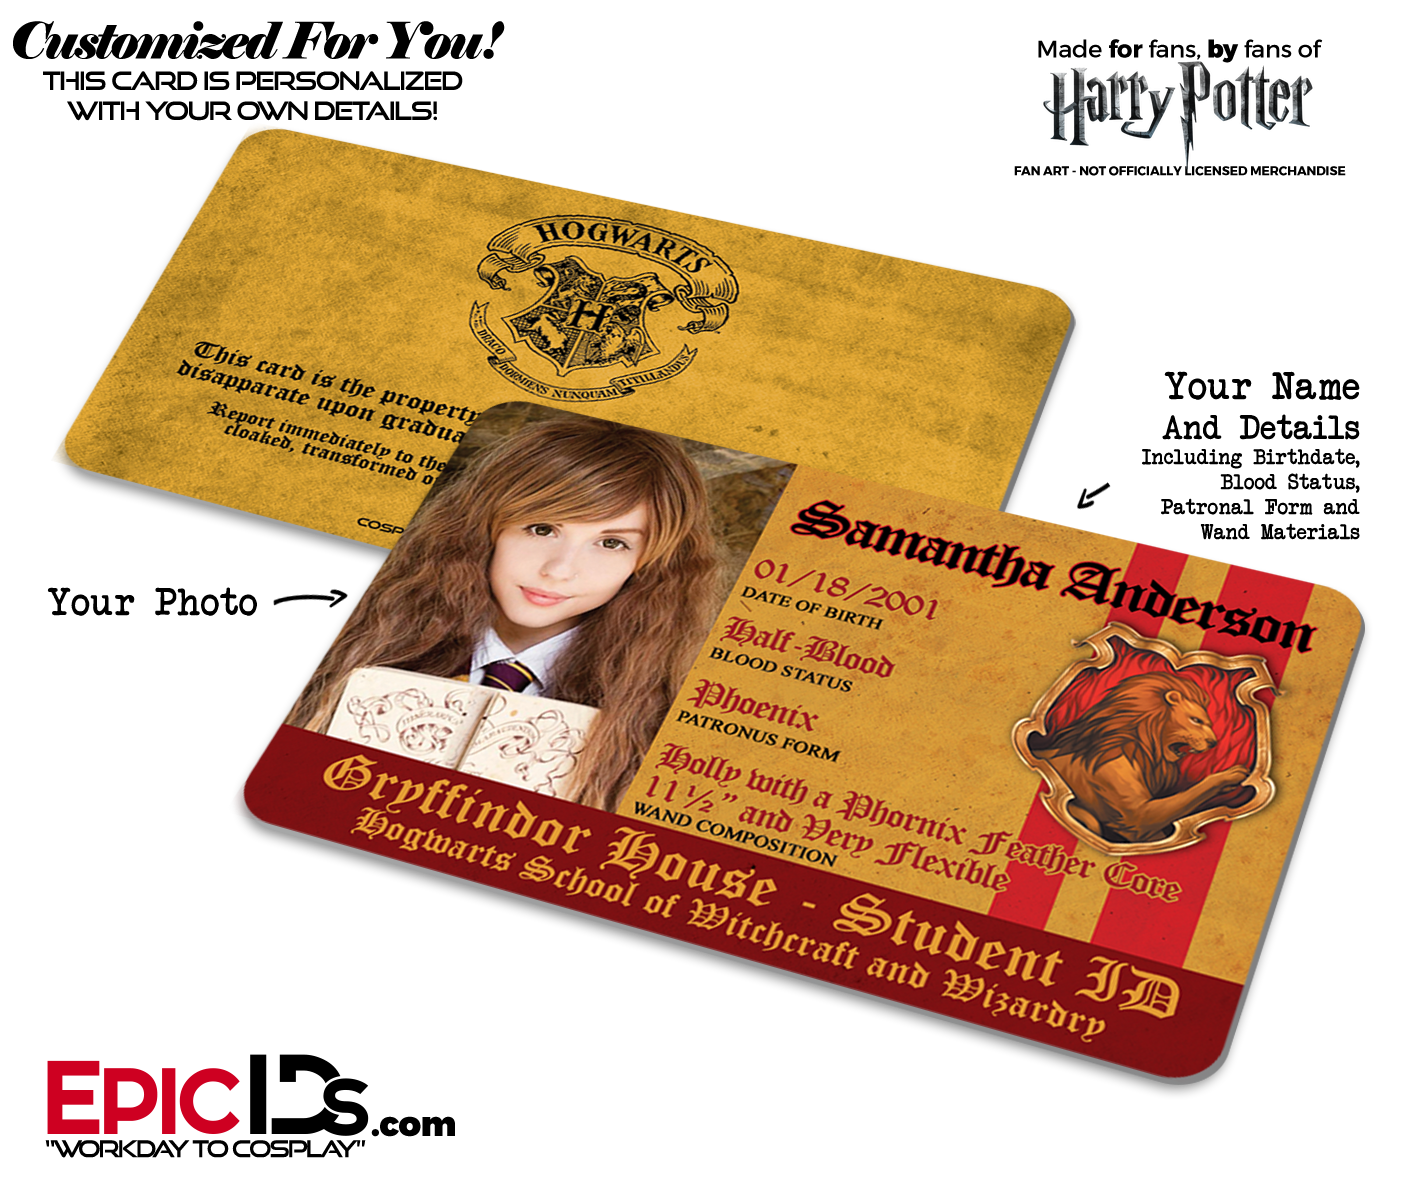 Hogwarts School 'Gryffindor' Harry Potter Inspired Student ID [Photo Personalized]